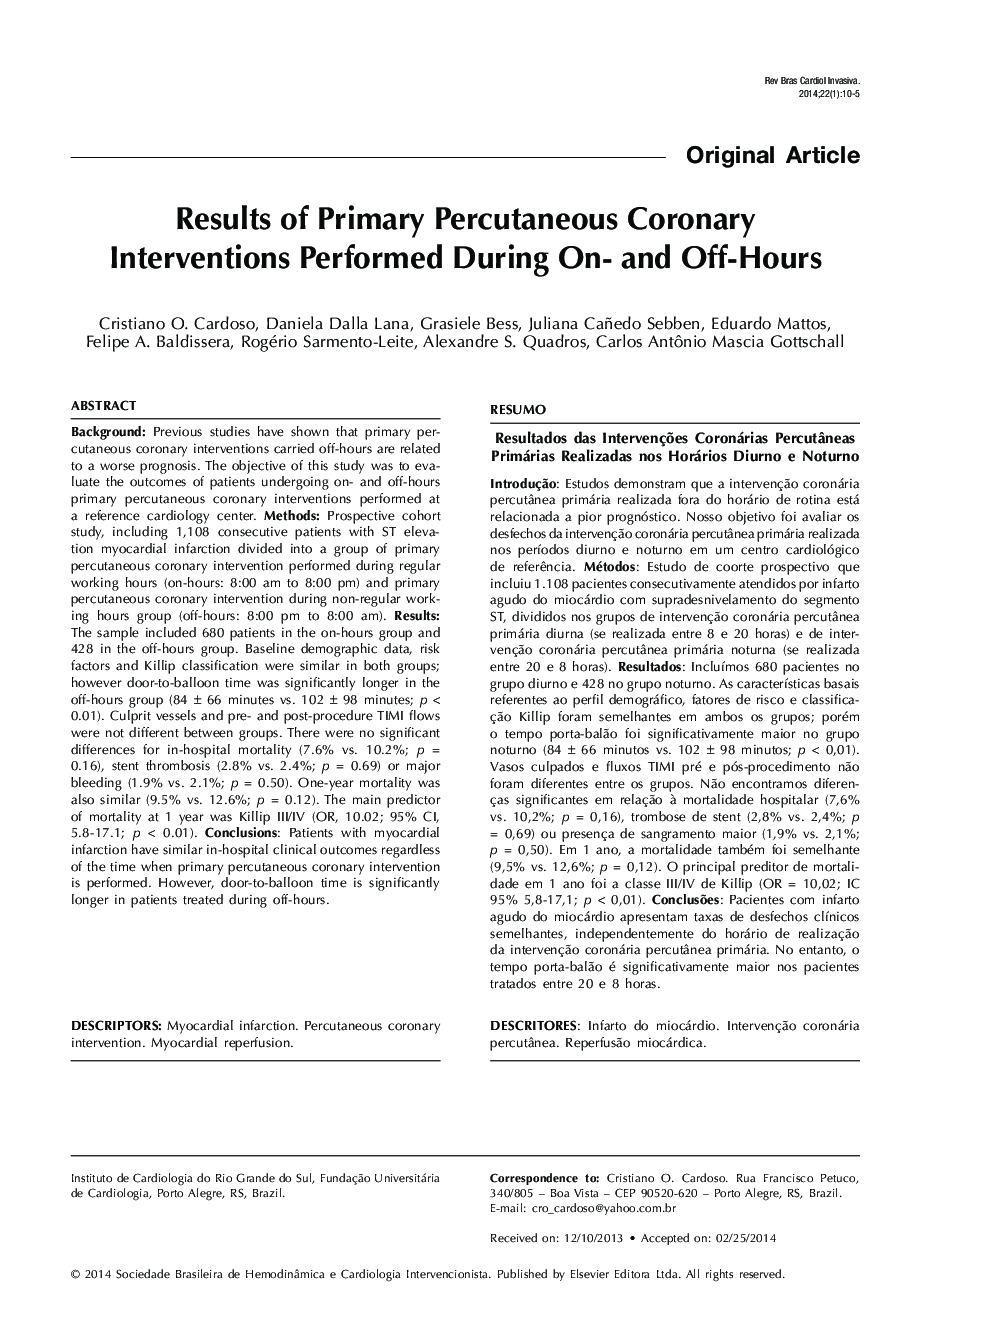 Results of Primary Percutaneous Coronary Interventions Performed During On- and Off-Hours